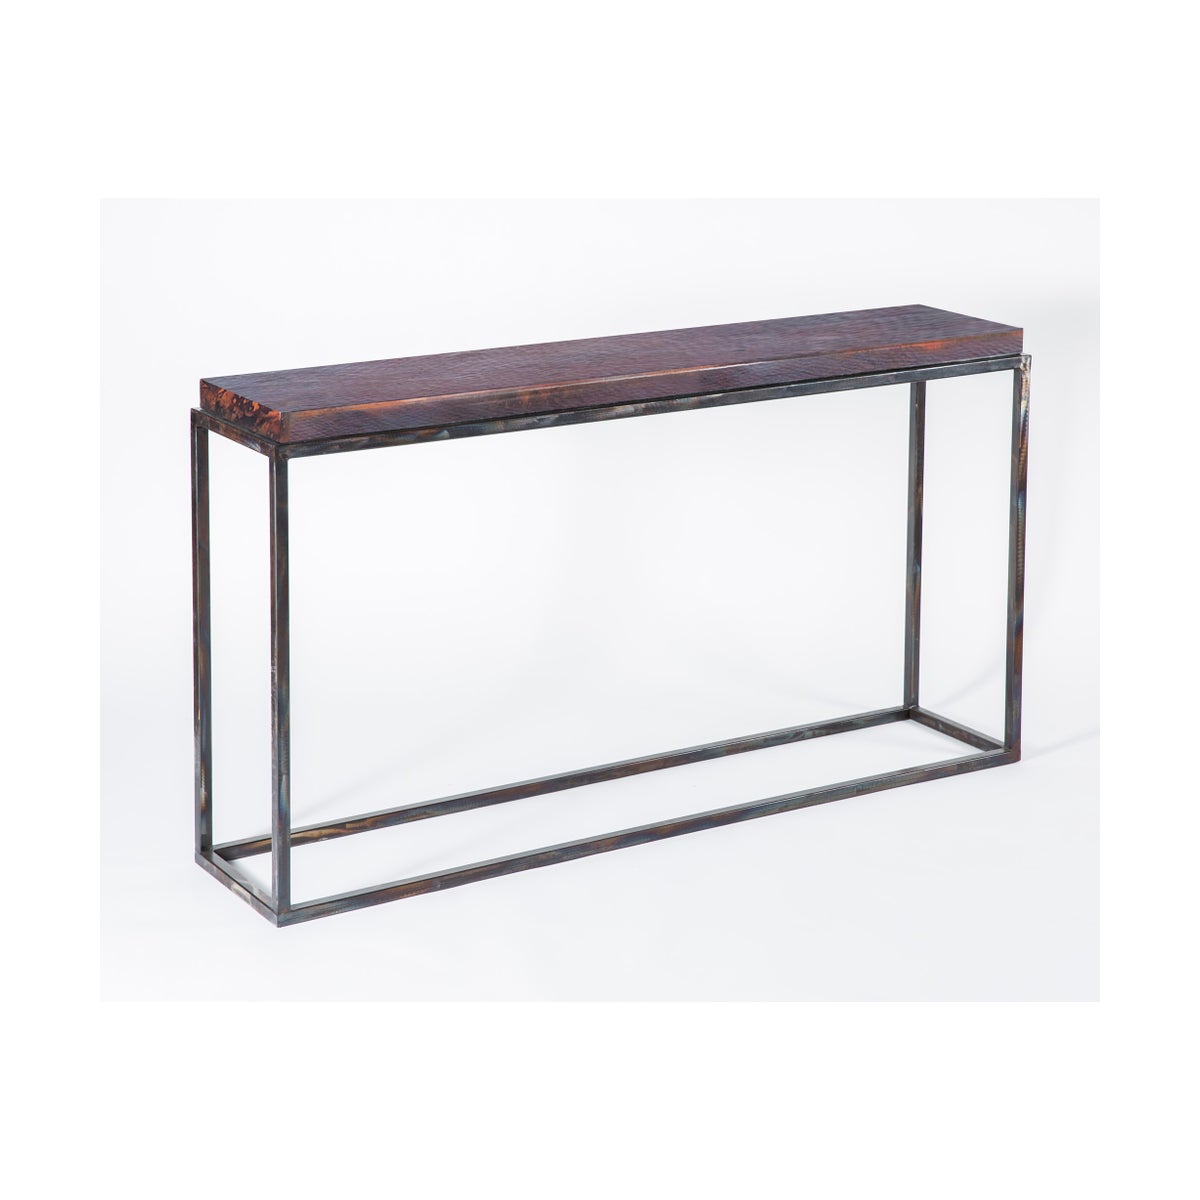 Brandon Console Table with Dark Brown Hammered Copper Top